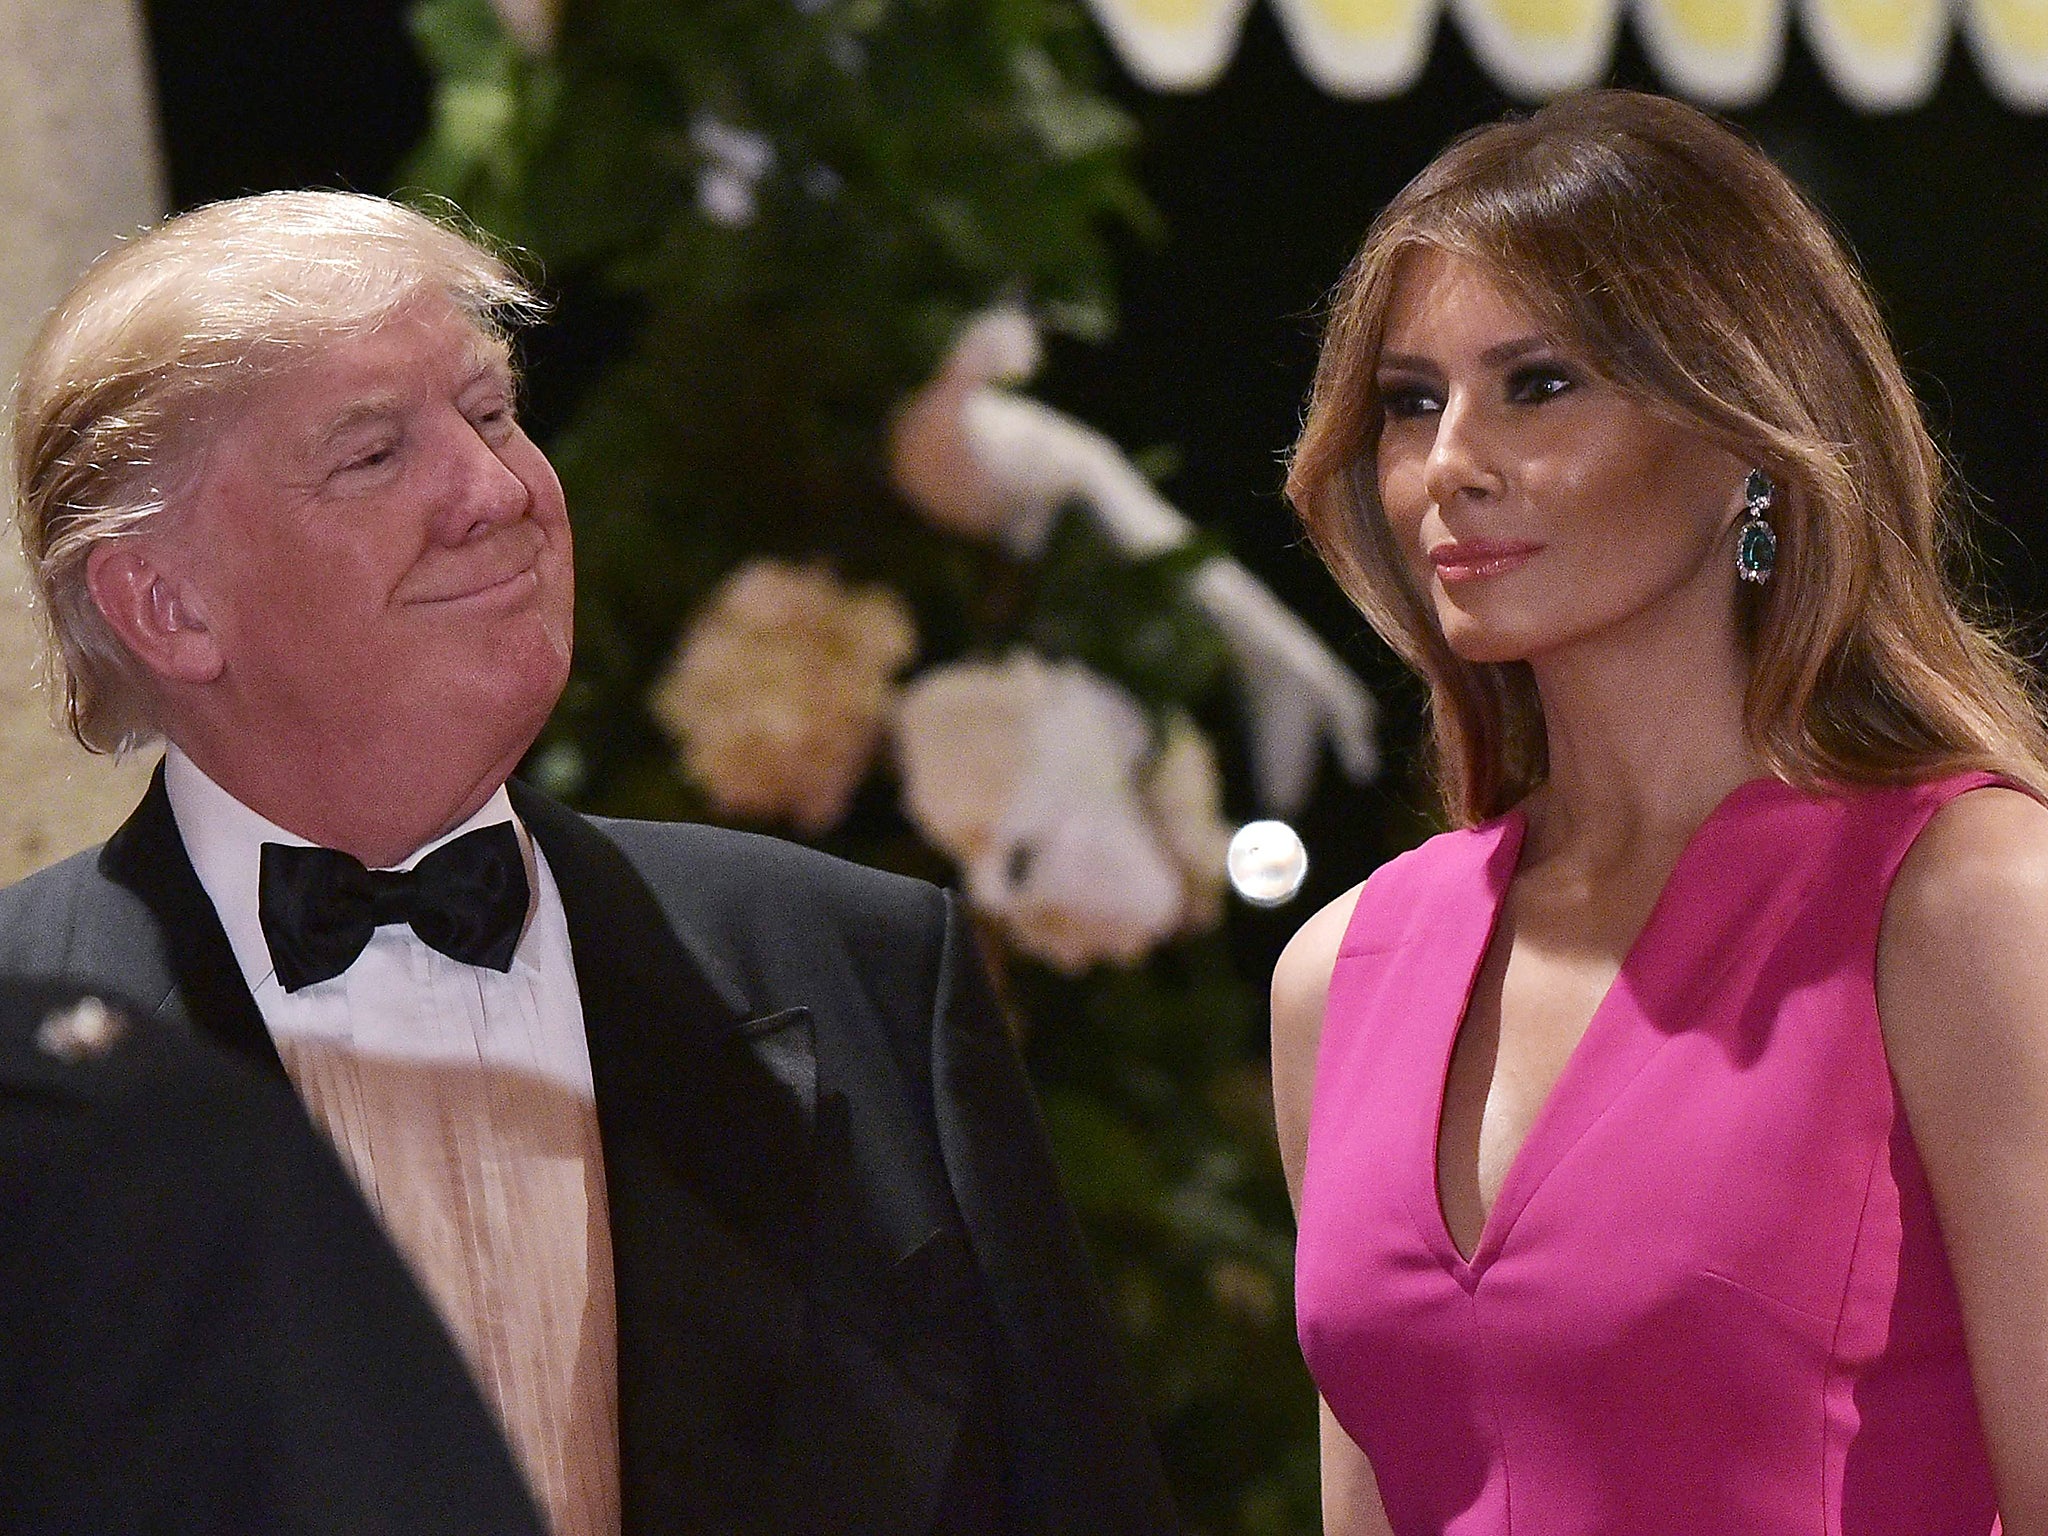 US President Donald Trump and First Lady Melania Trump arrive for the 60th Annual Red Cross Gala at his Mar-a-Lago estate in Palm Beach